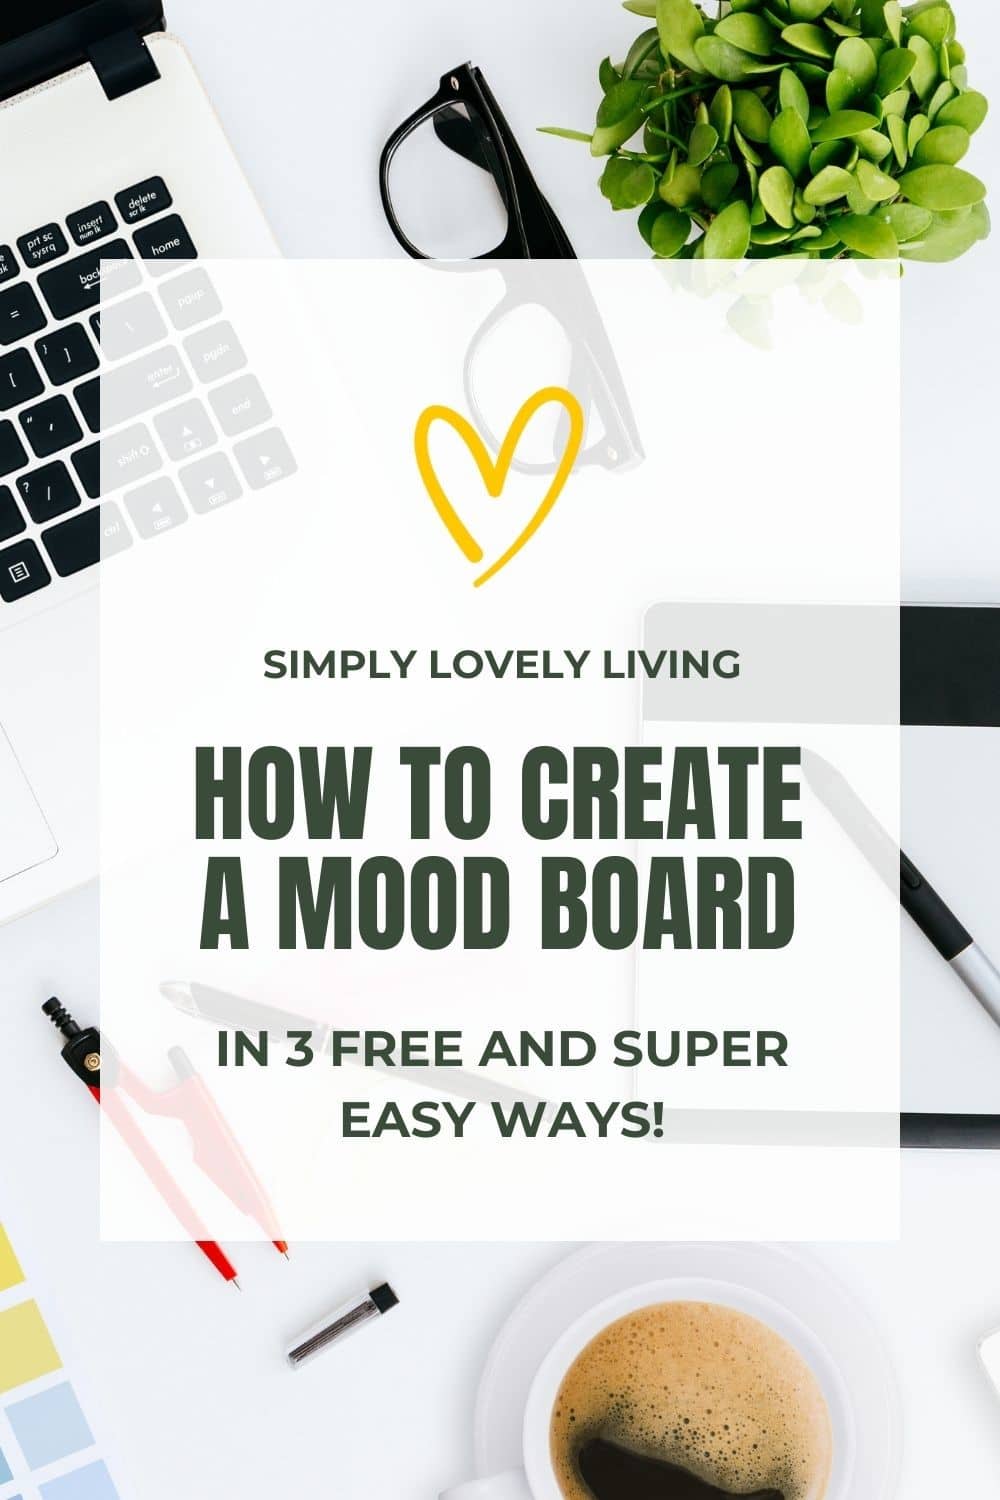 HOW TO CREATE A MOOD BOARD IN 3 FREE AND SUPER EASY WAYS!